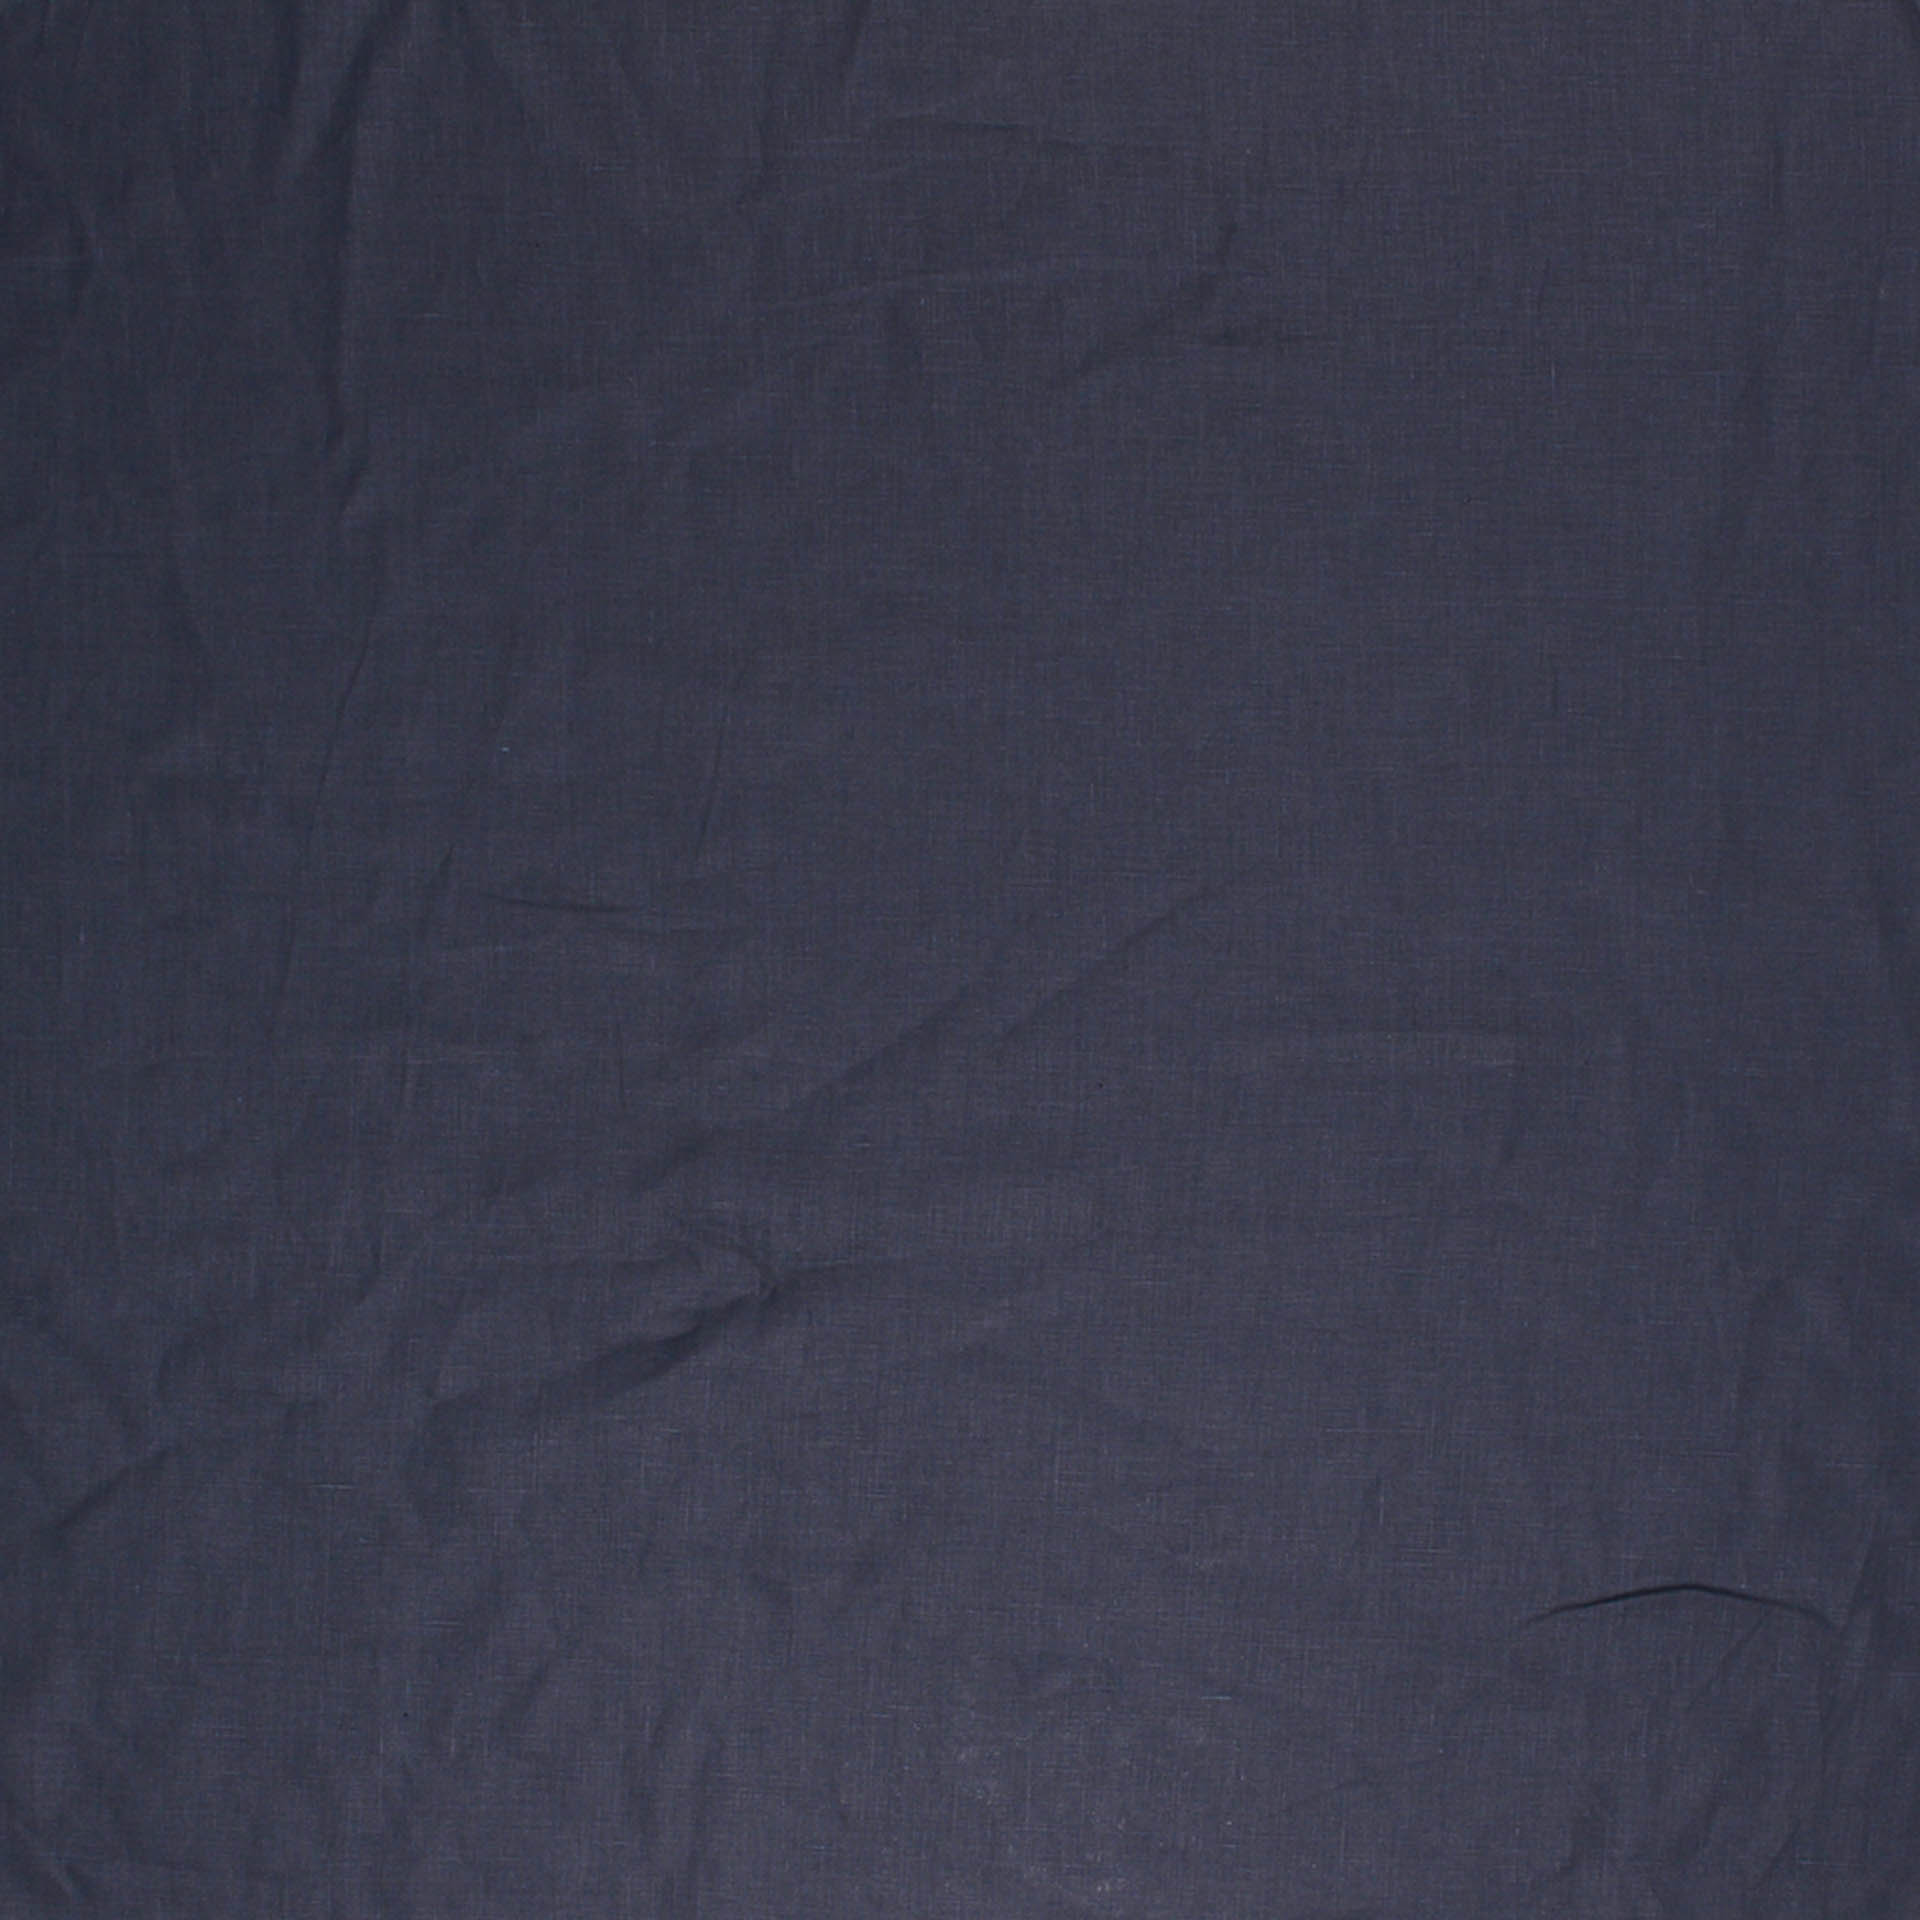 RM COCO  Bruges / Chanel Blue - Solid, Woven/Jacquard, Linen/Blend Fabric